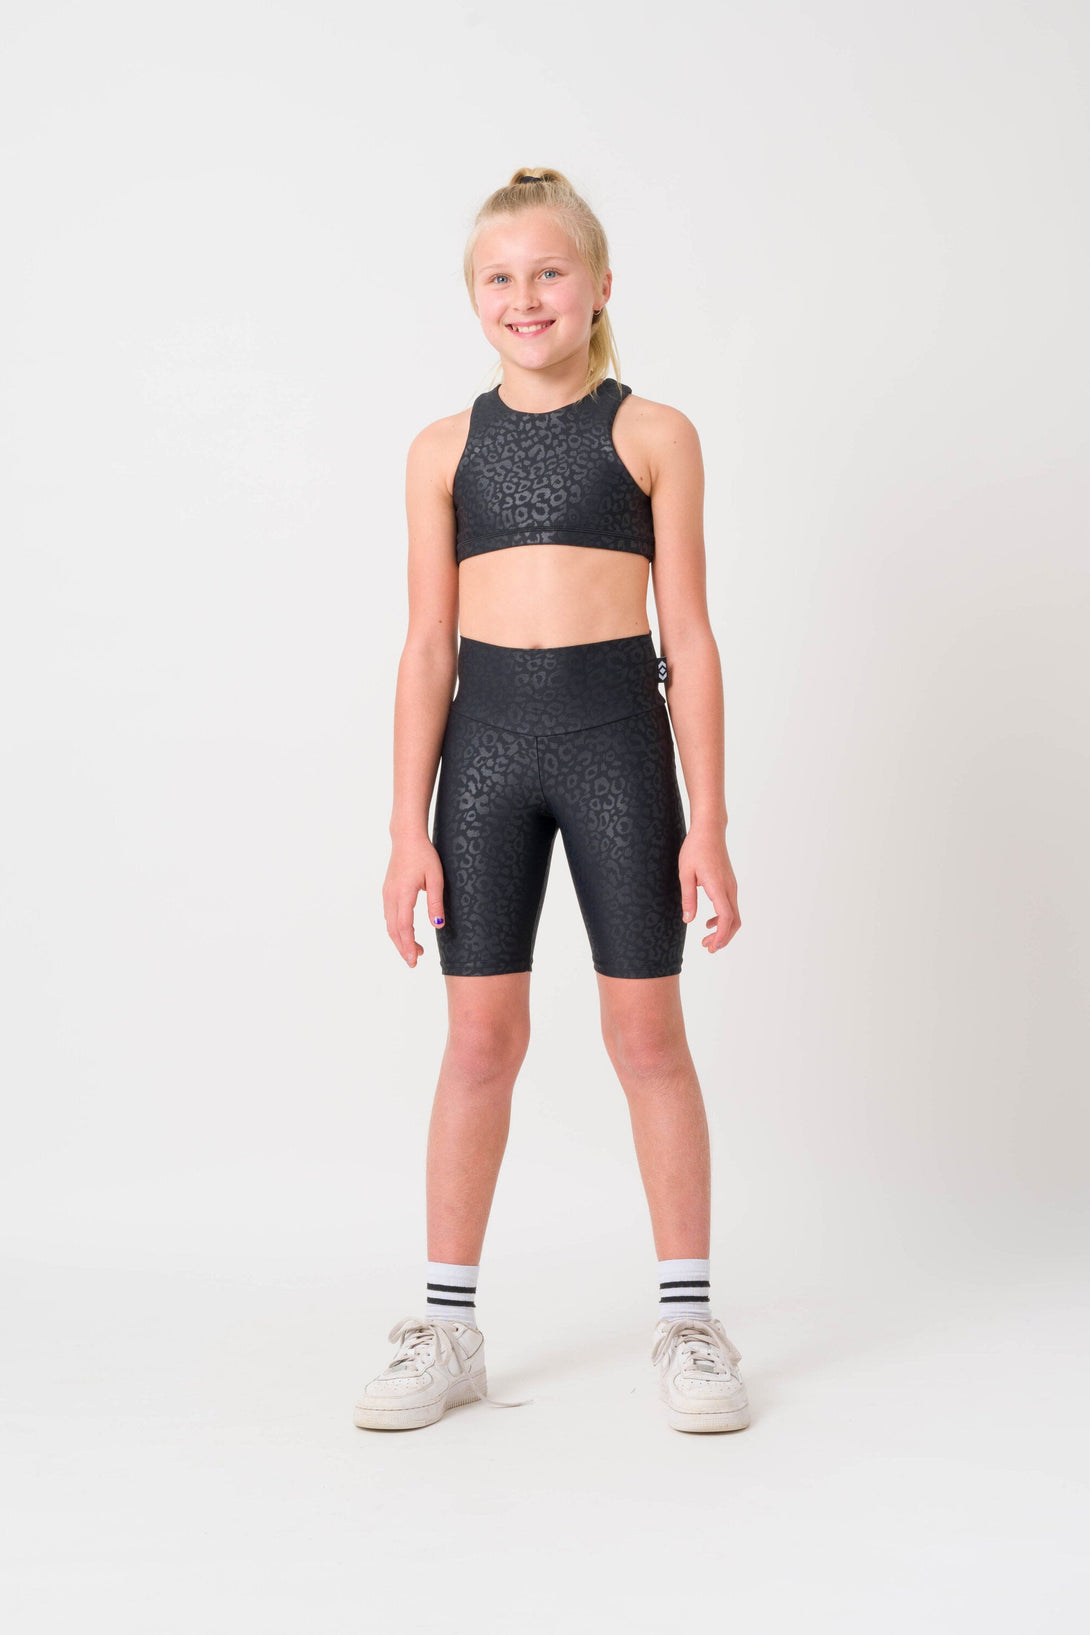 Black Exotic Touch Jag - Kids Long Shorts-Activewear-Exoticathletica